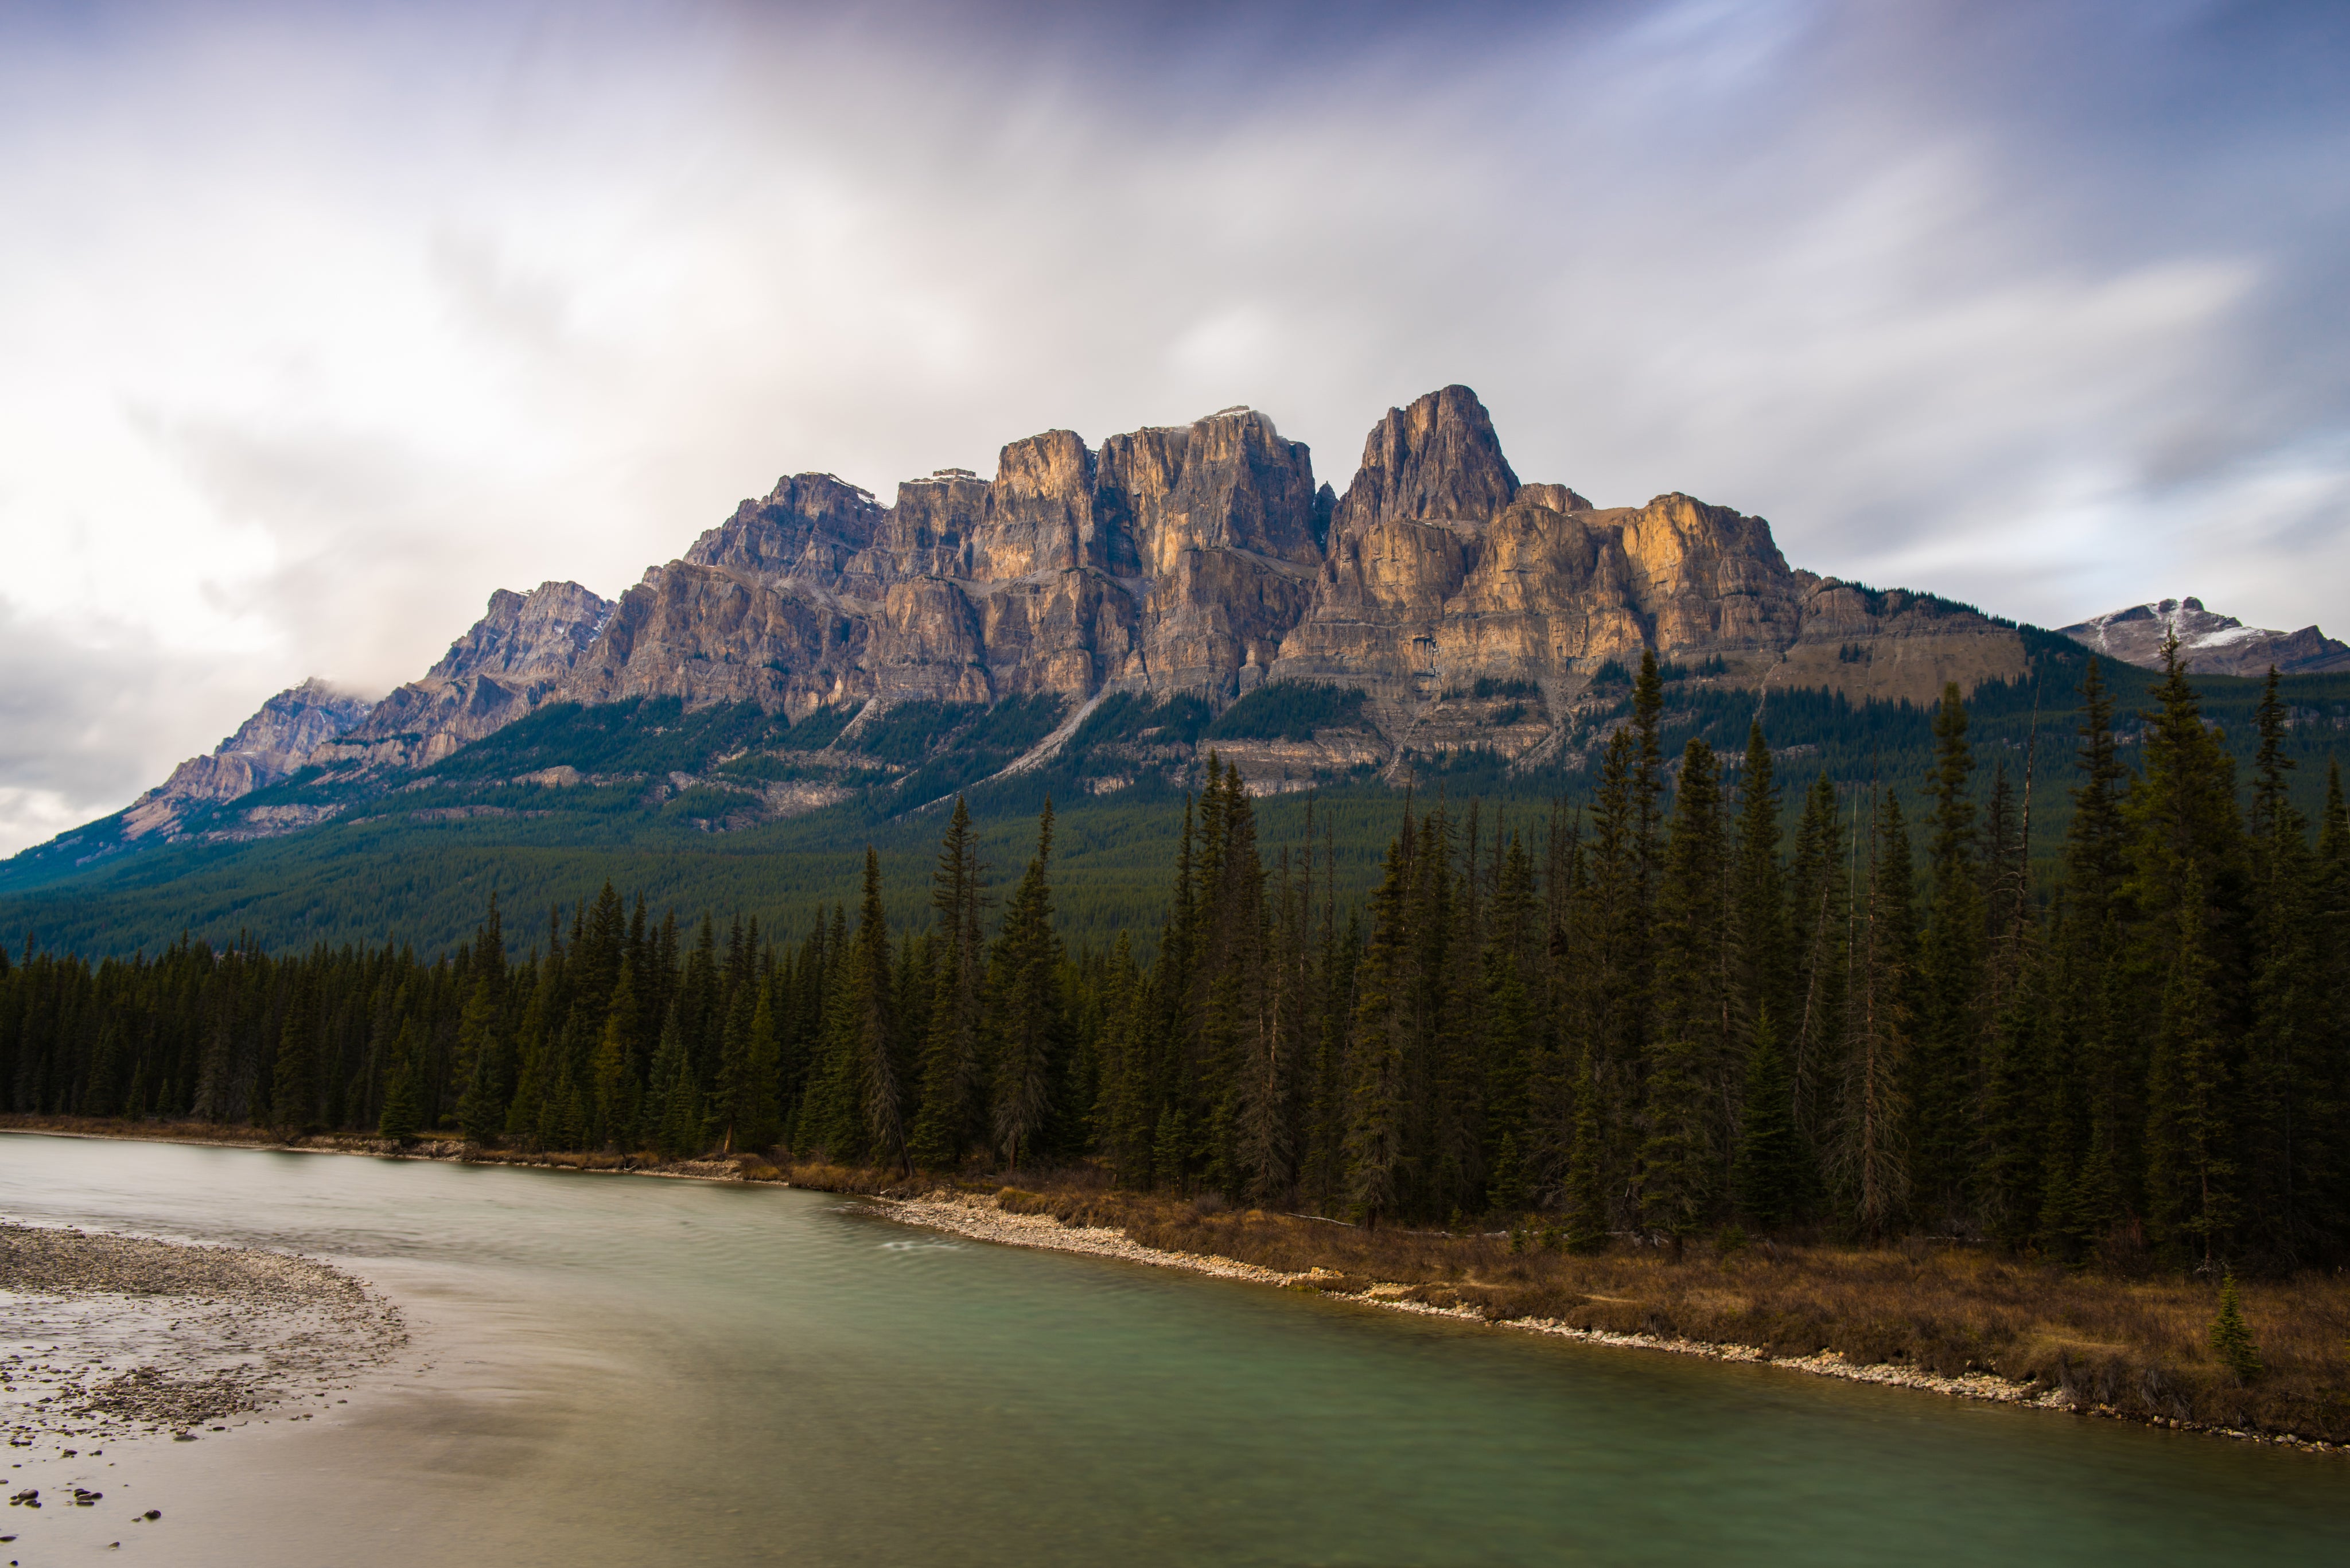 castle-mountain-towering-over-lush-alberta-forest.jpg